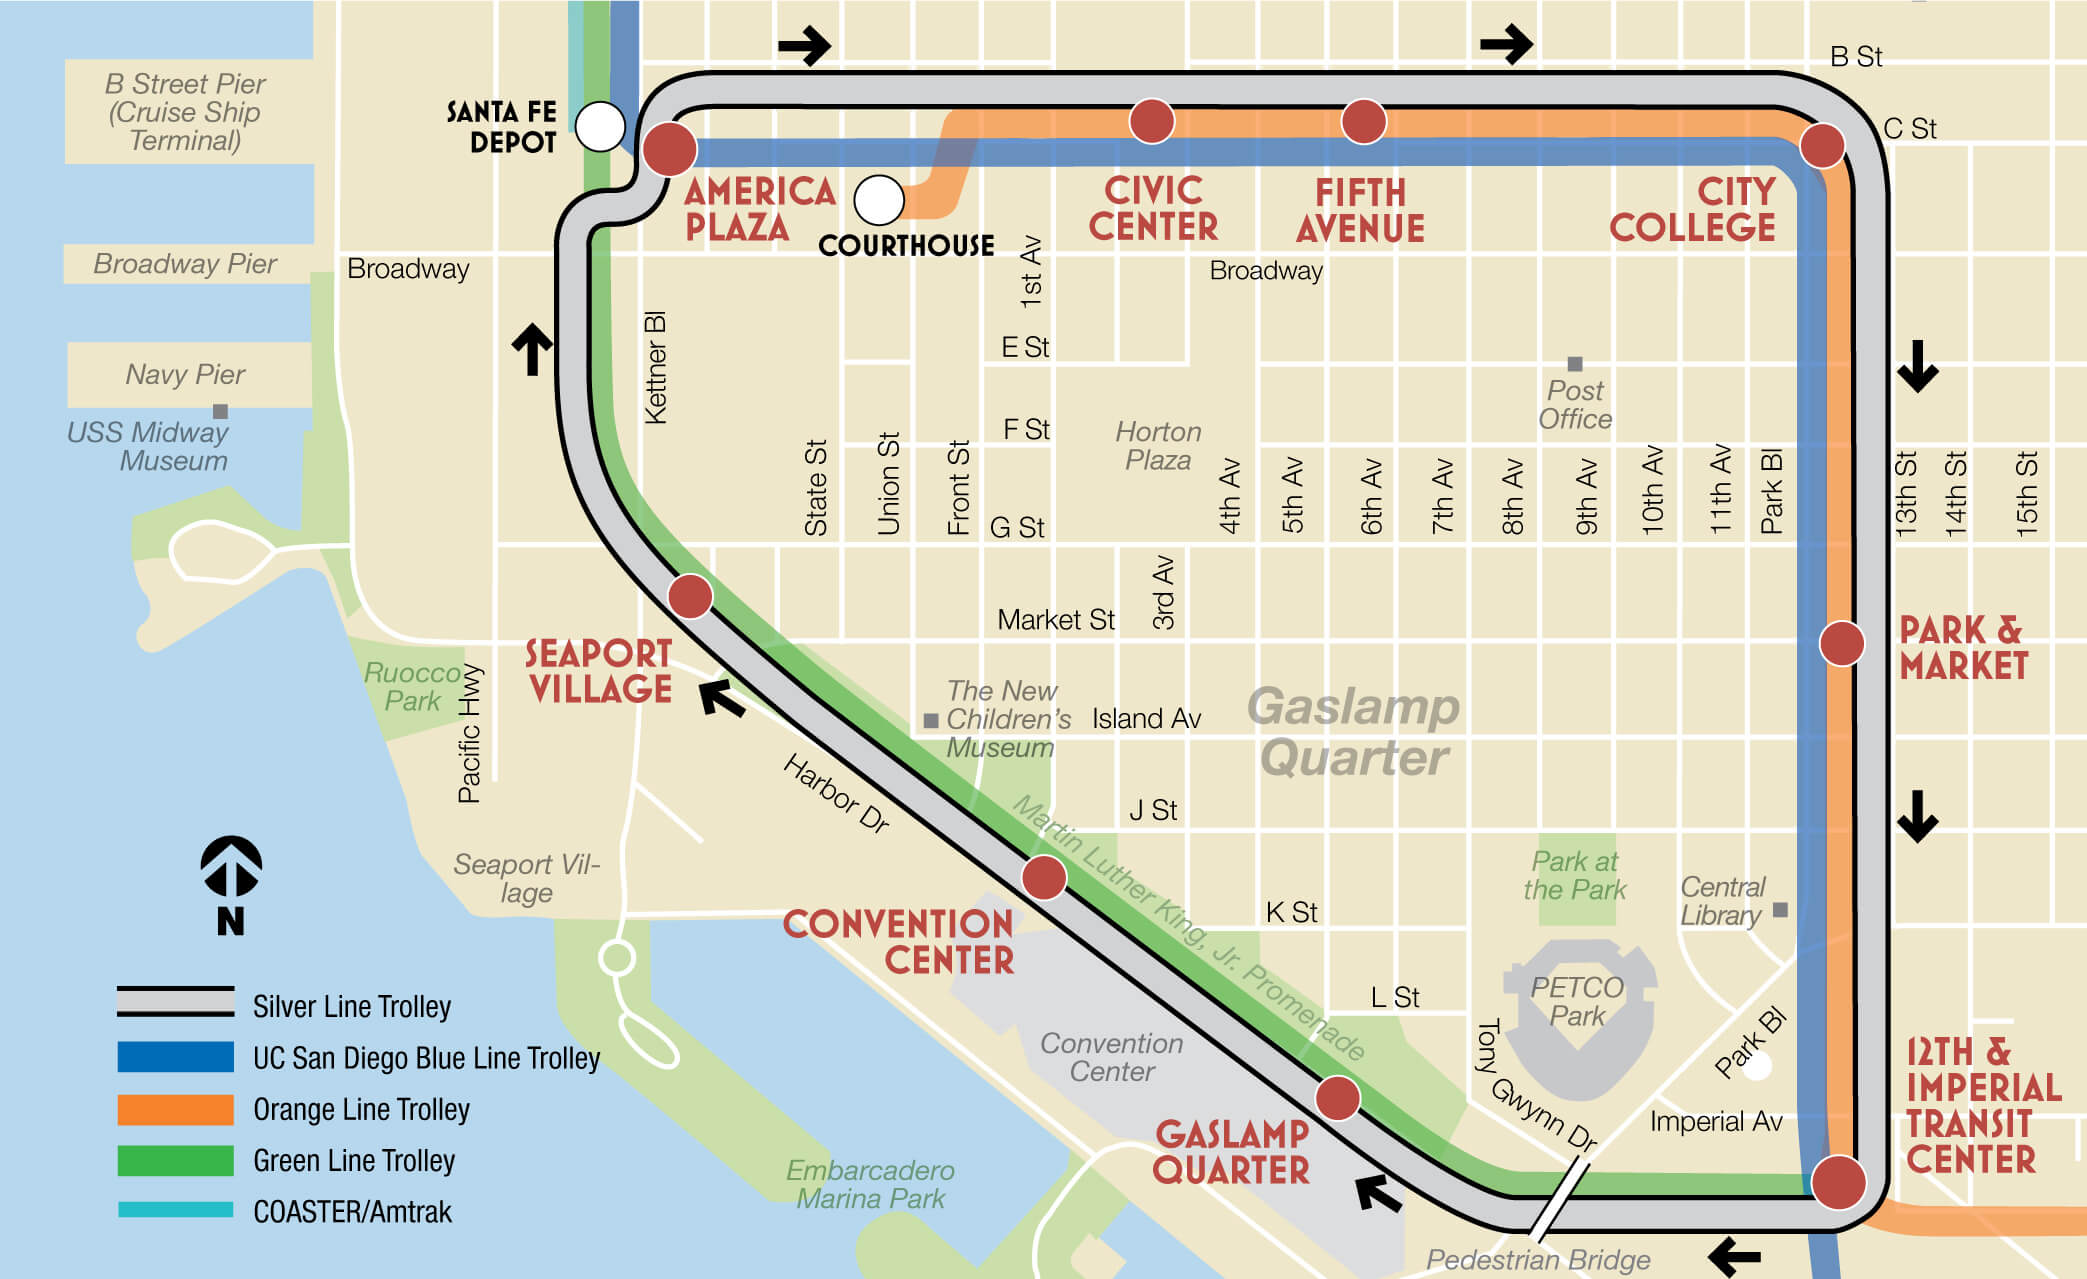 silver express Route: Schedules, Stops & Maps - Circular with Library  (Updated)